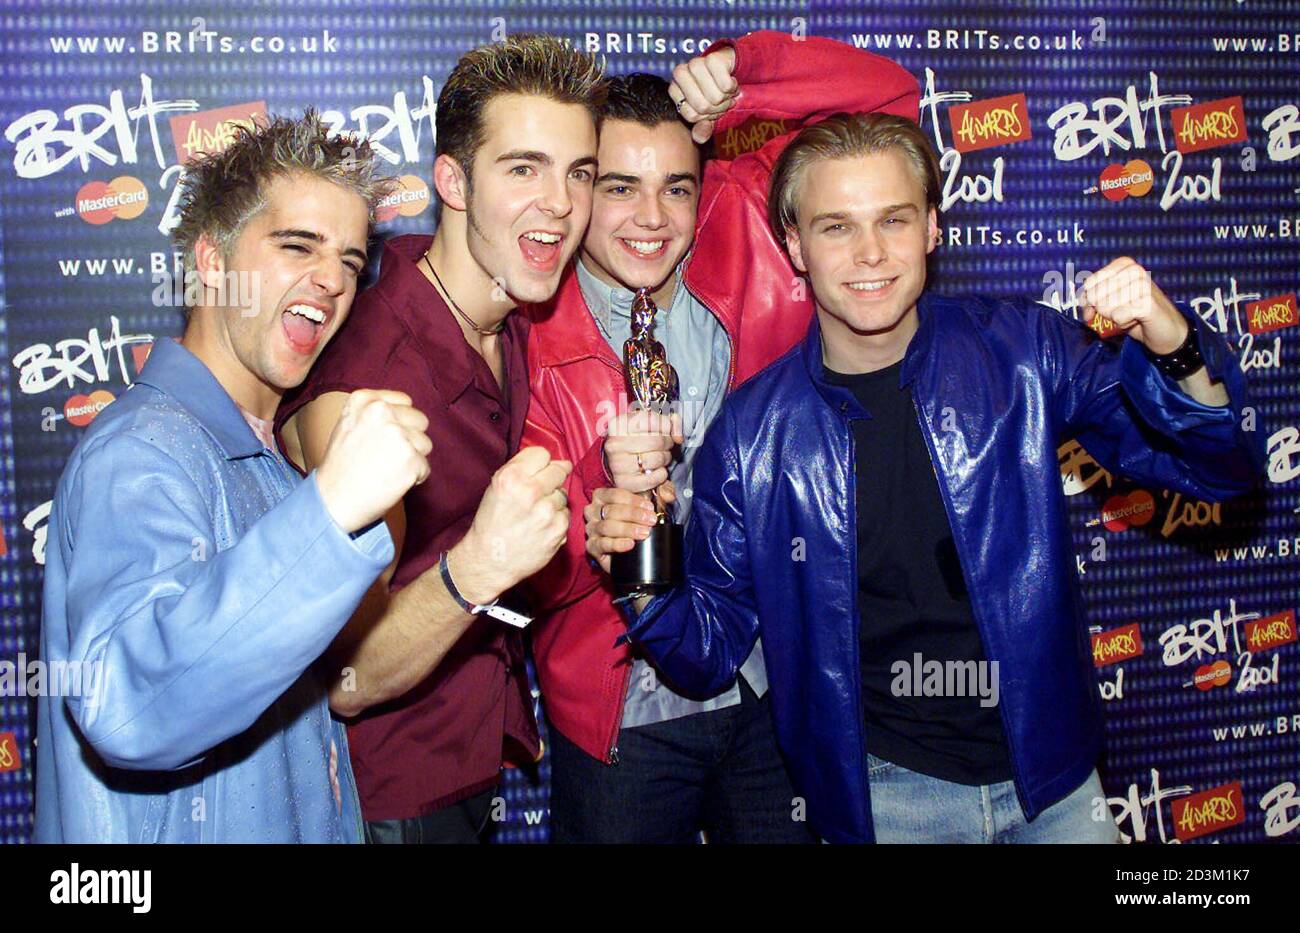 Pop group A1 pose for photographers with their trophy for the Best British  Newcomer at the Brit awards in London's Earls Court arena February 26,  2001. The Brit awards are the British